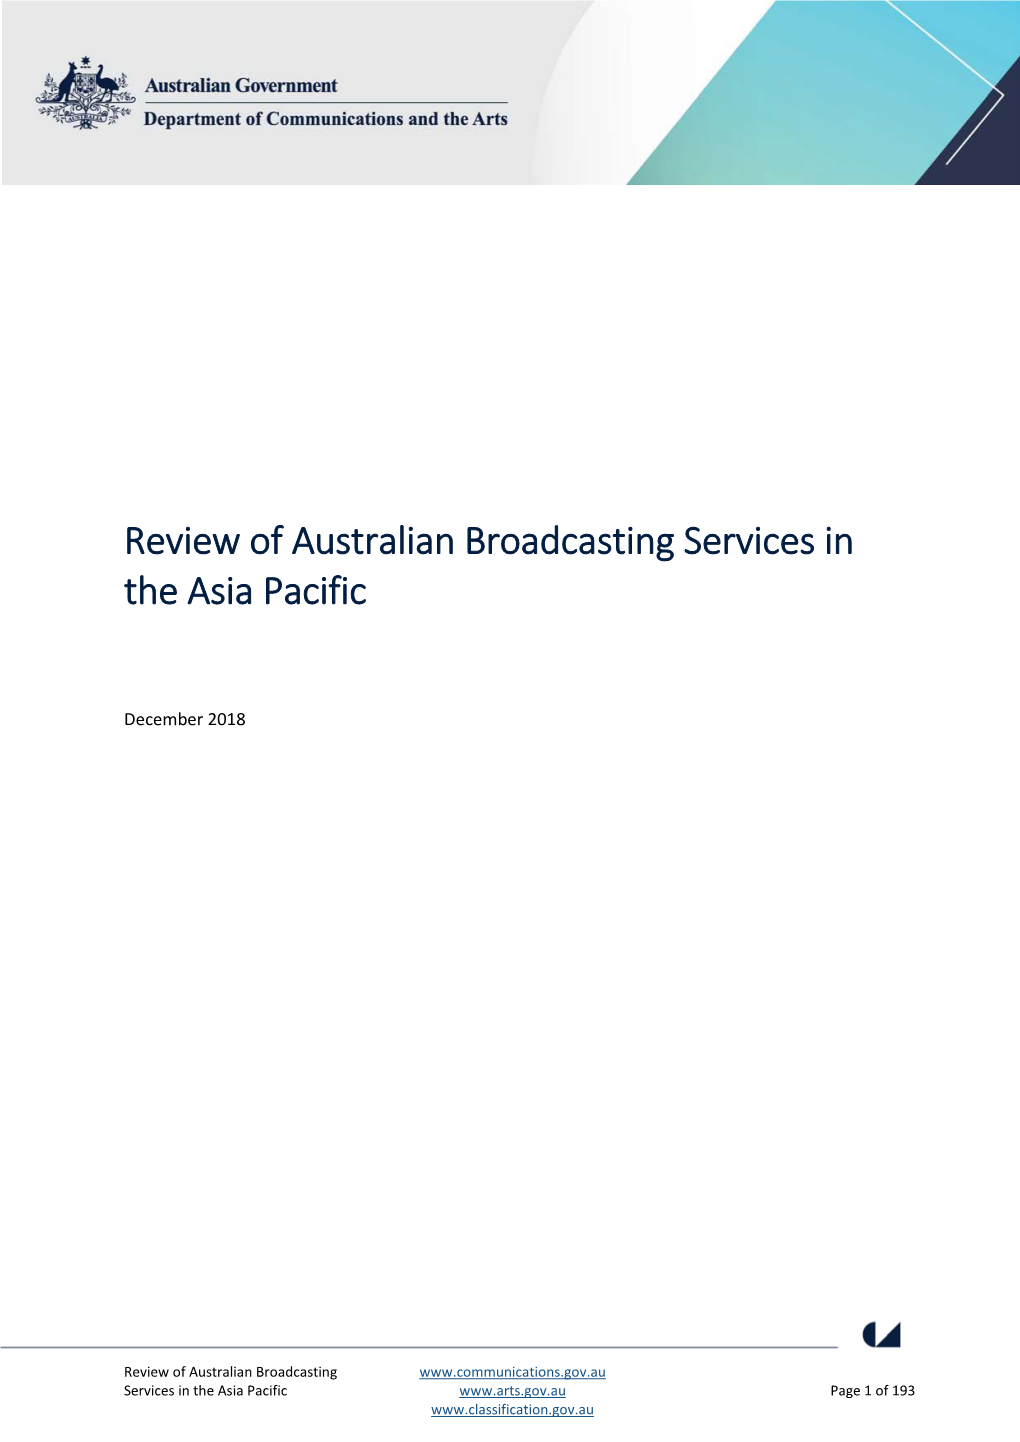 Review of Australian Broadcasting Services in the Asia Pacific